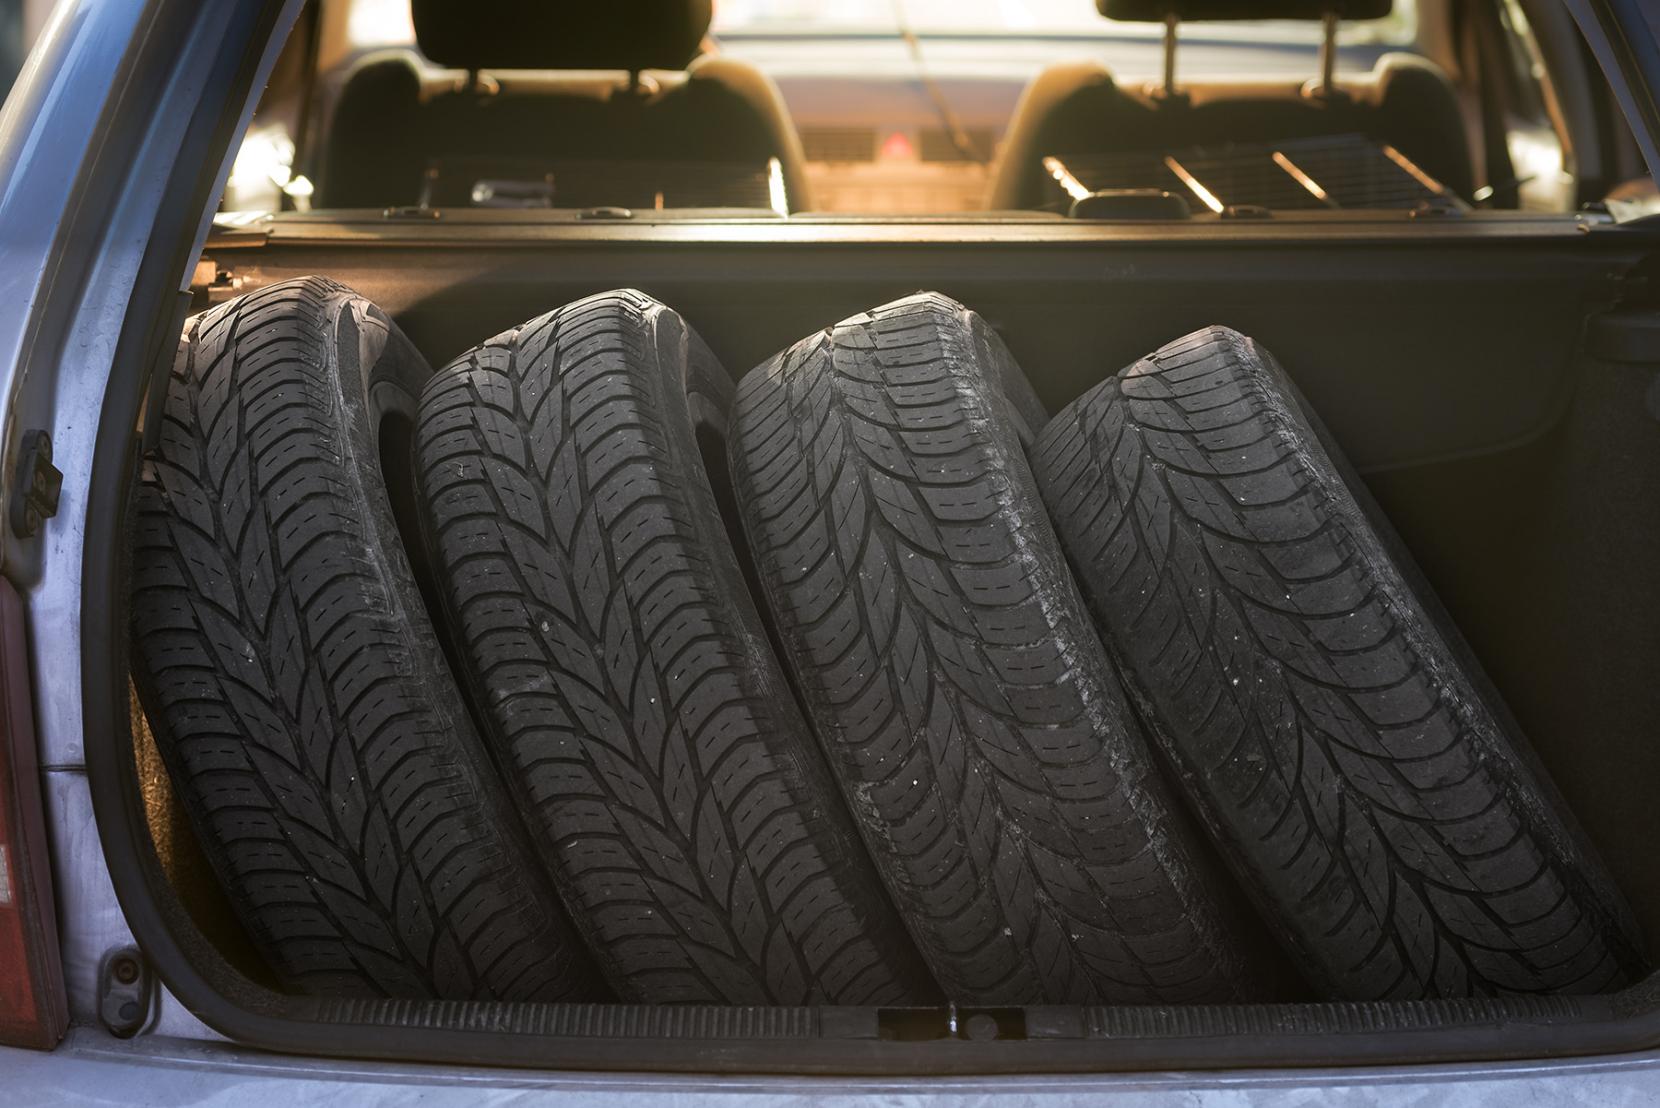 Driving with Winter Tires In Summer: Top Reasons to Reconsider